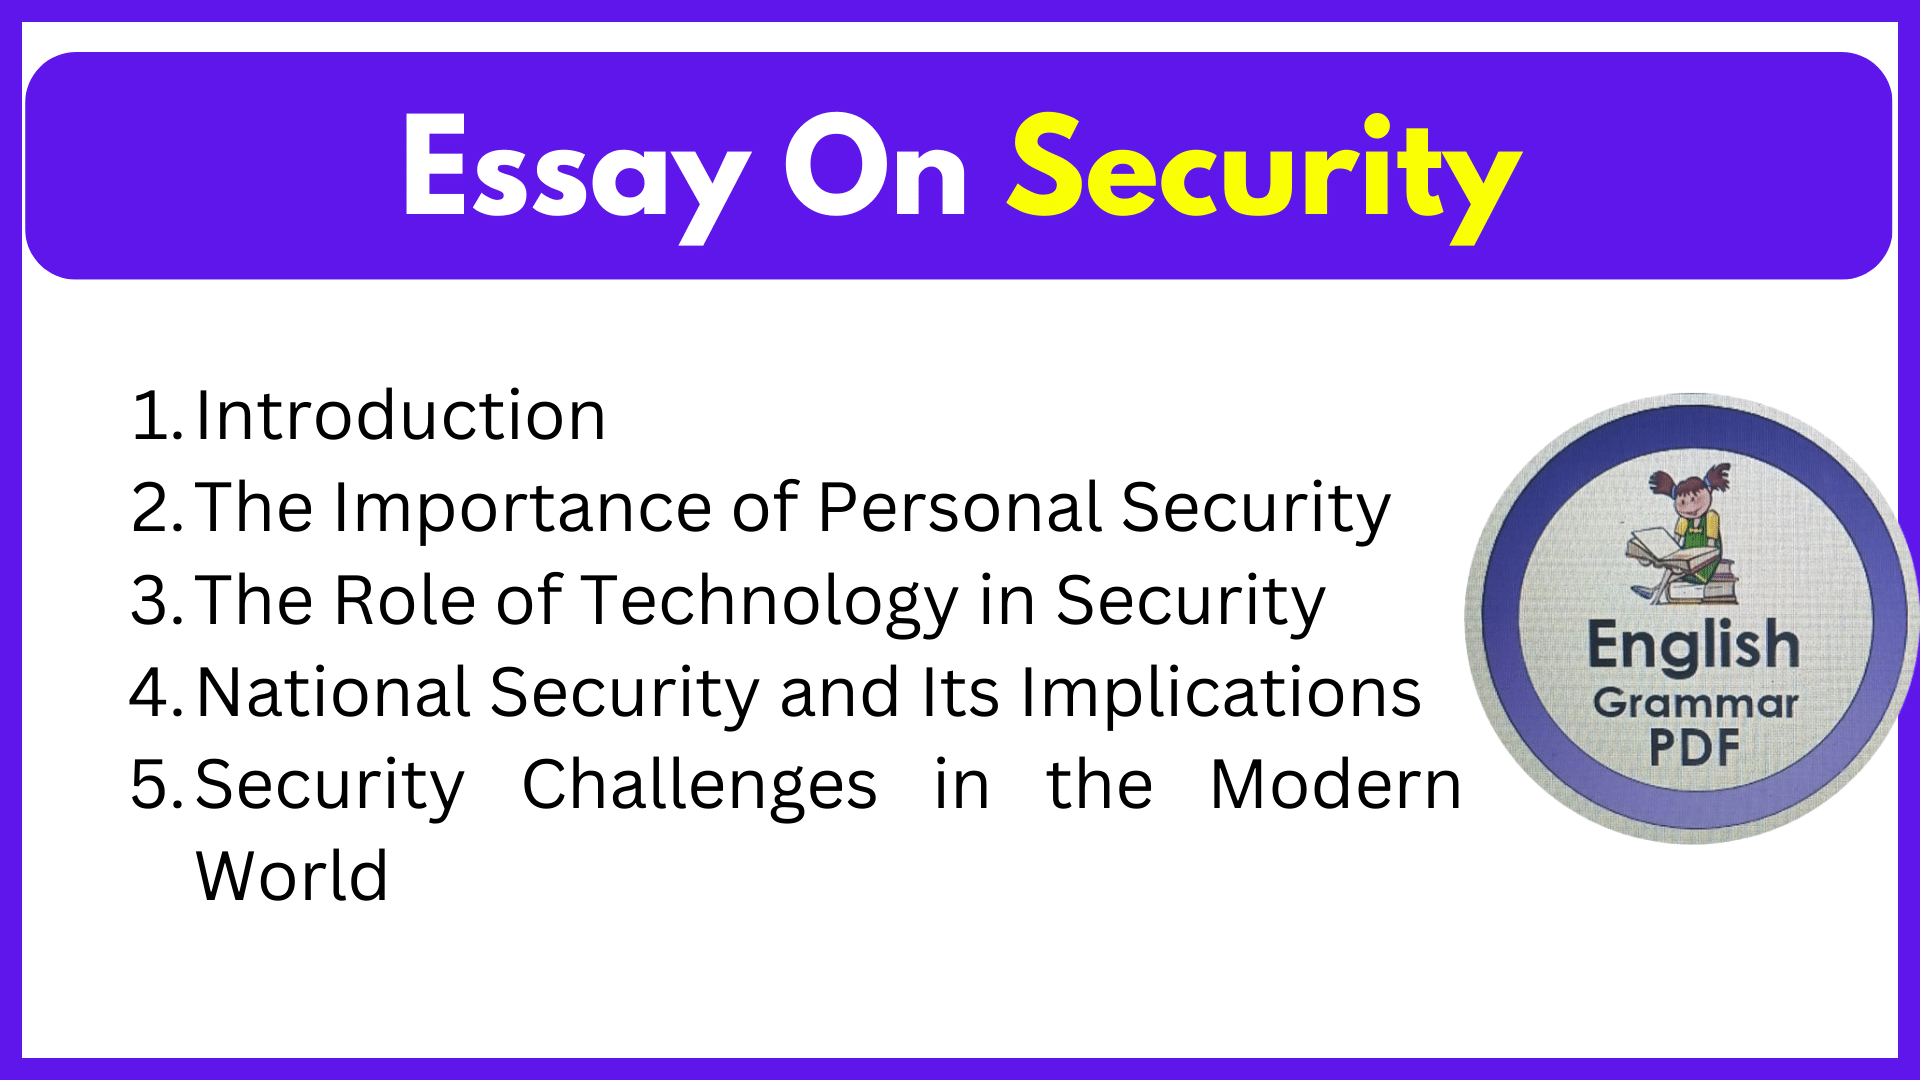 Essay On Security